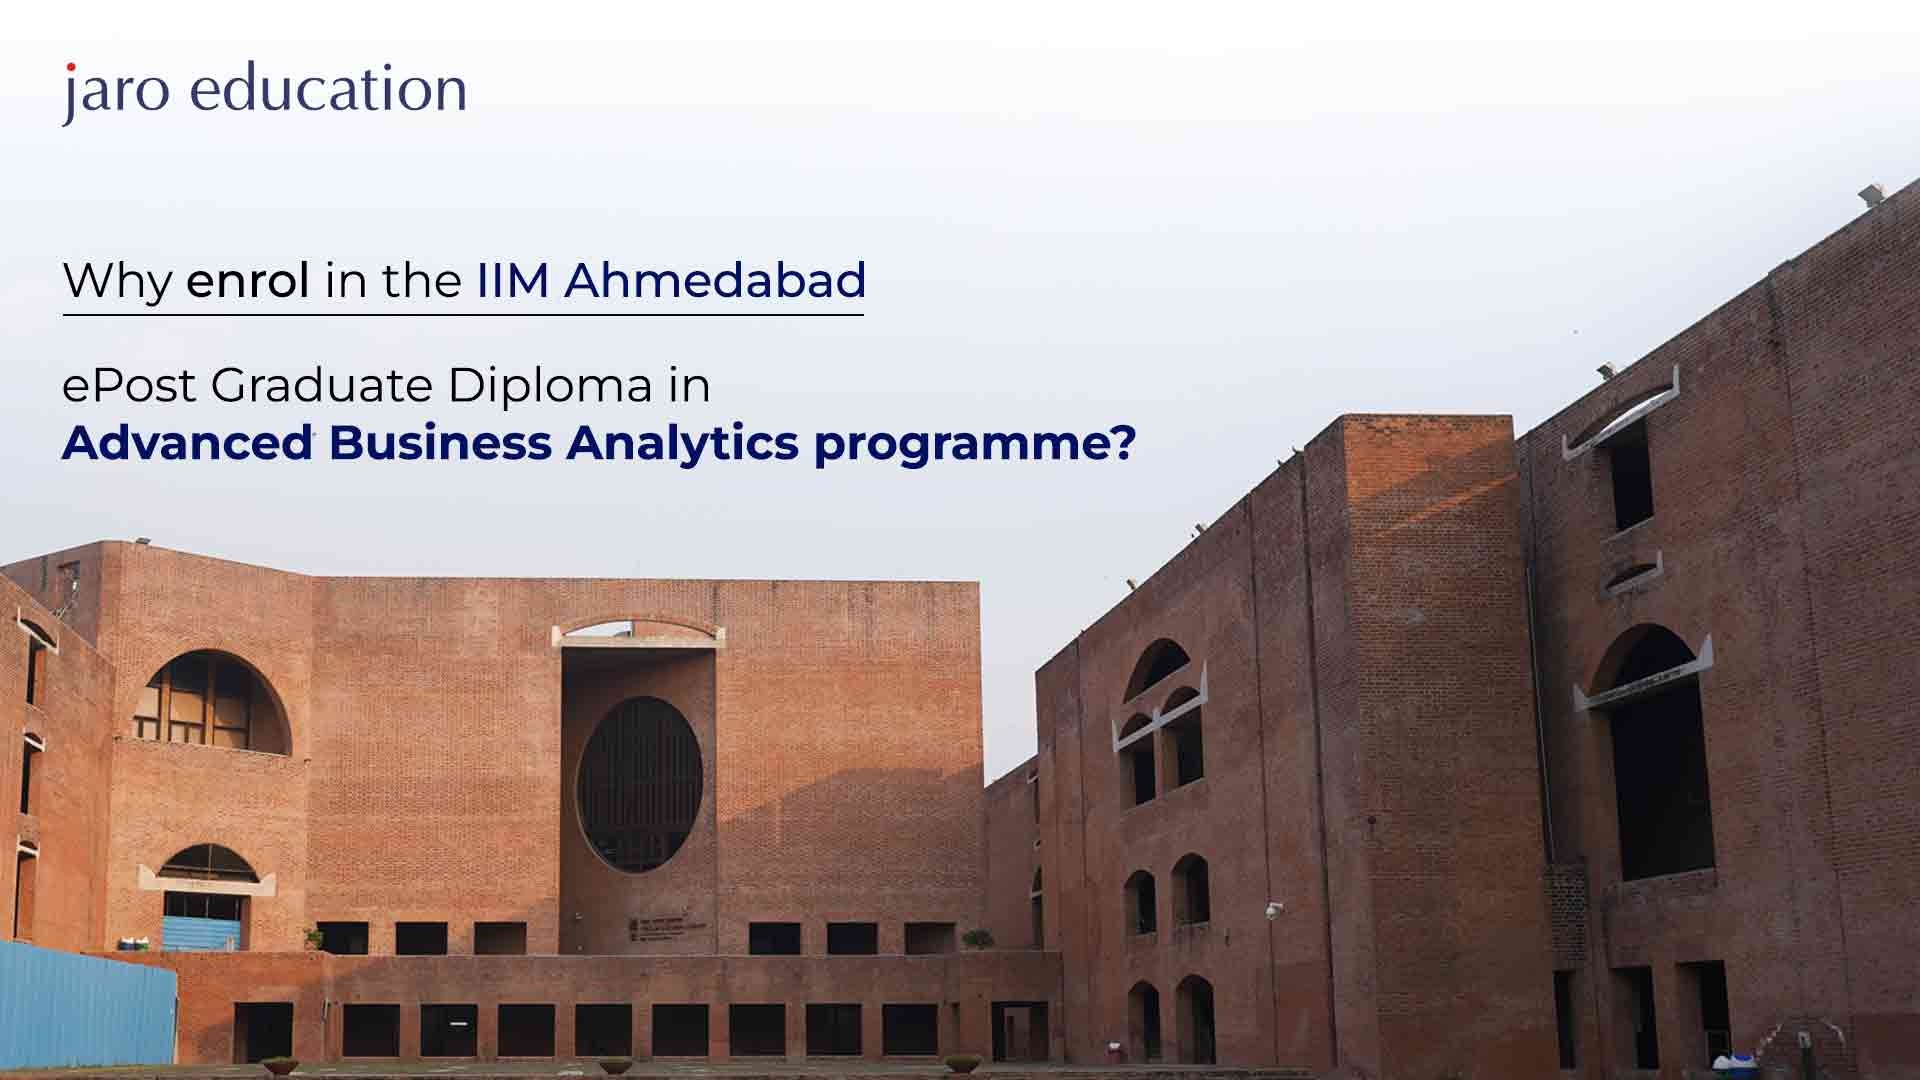 advantages-of-applying-for-the-epgd-aba-programme-by-iim-ahmedabad